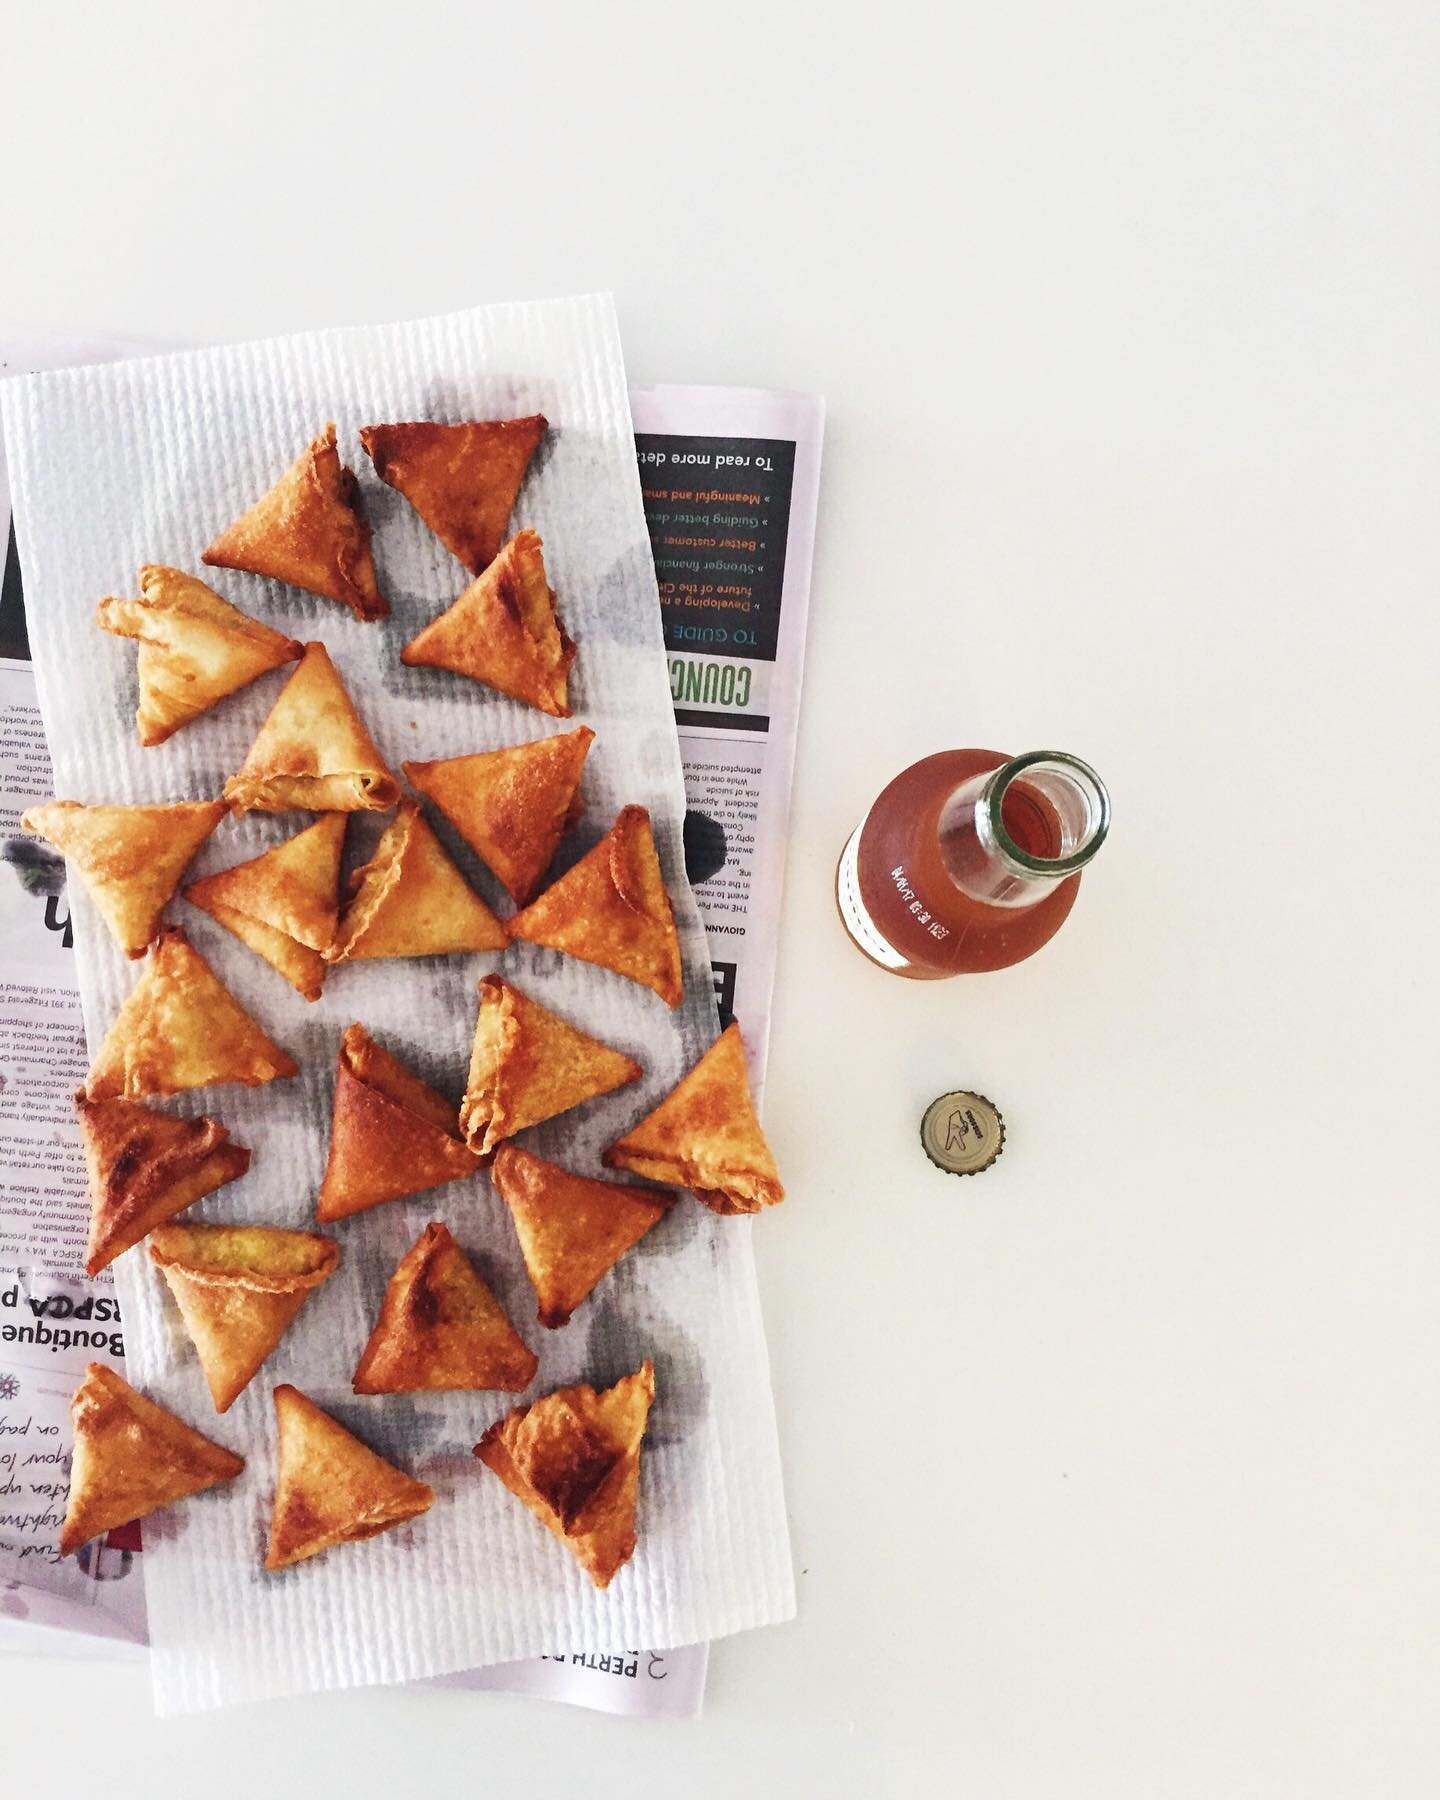 Perfect weather for samosas ☔️

#spicemama #indianfood #snacks #samosa #perthfood #perthlife #homecooking #snacktime